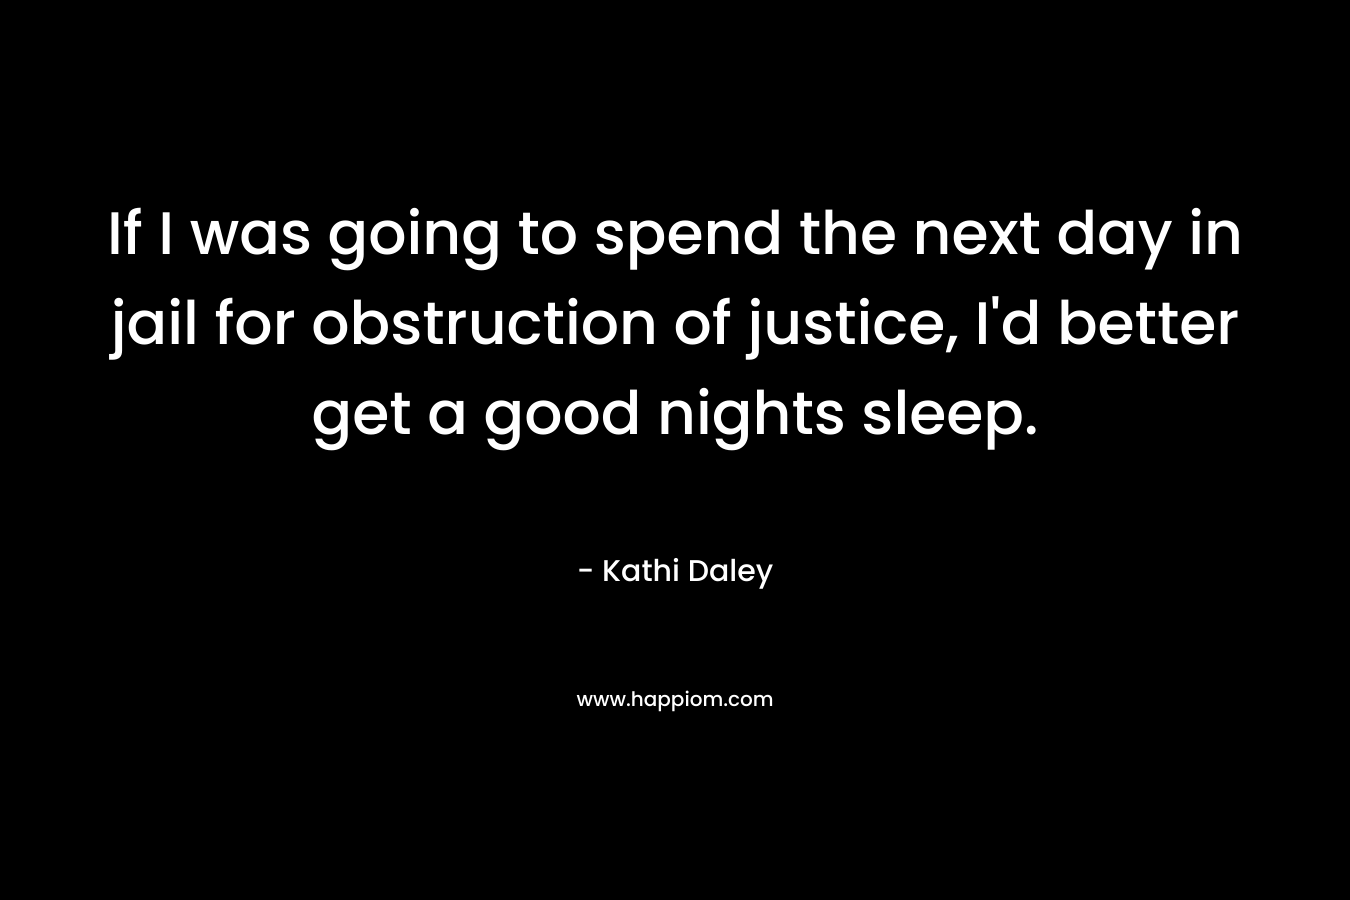 If I was going to spend the next day in jail for obstruction of justice, I’d better get a good nights sleep. – Kathi Daley